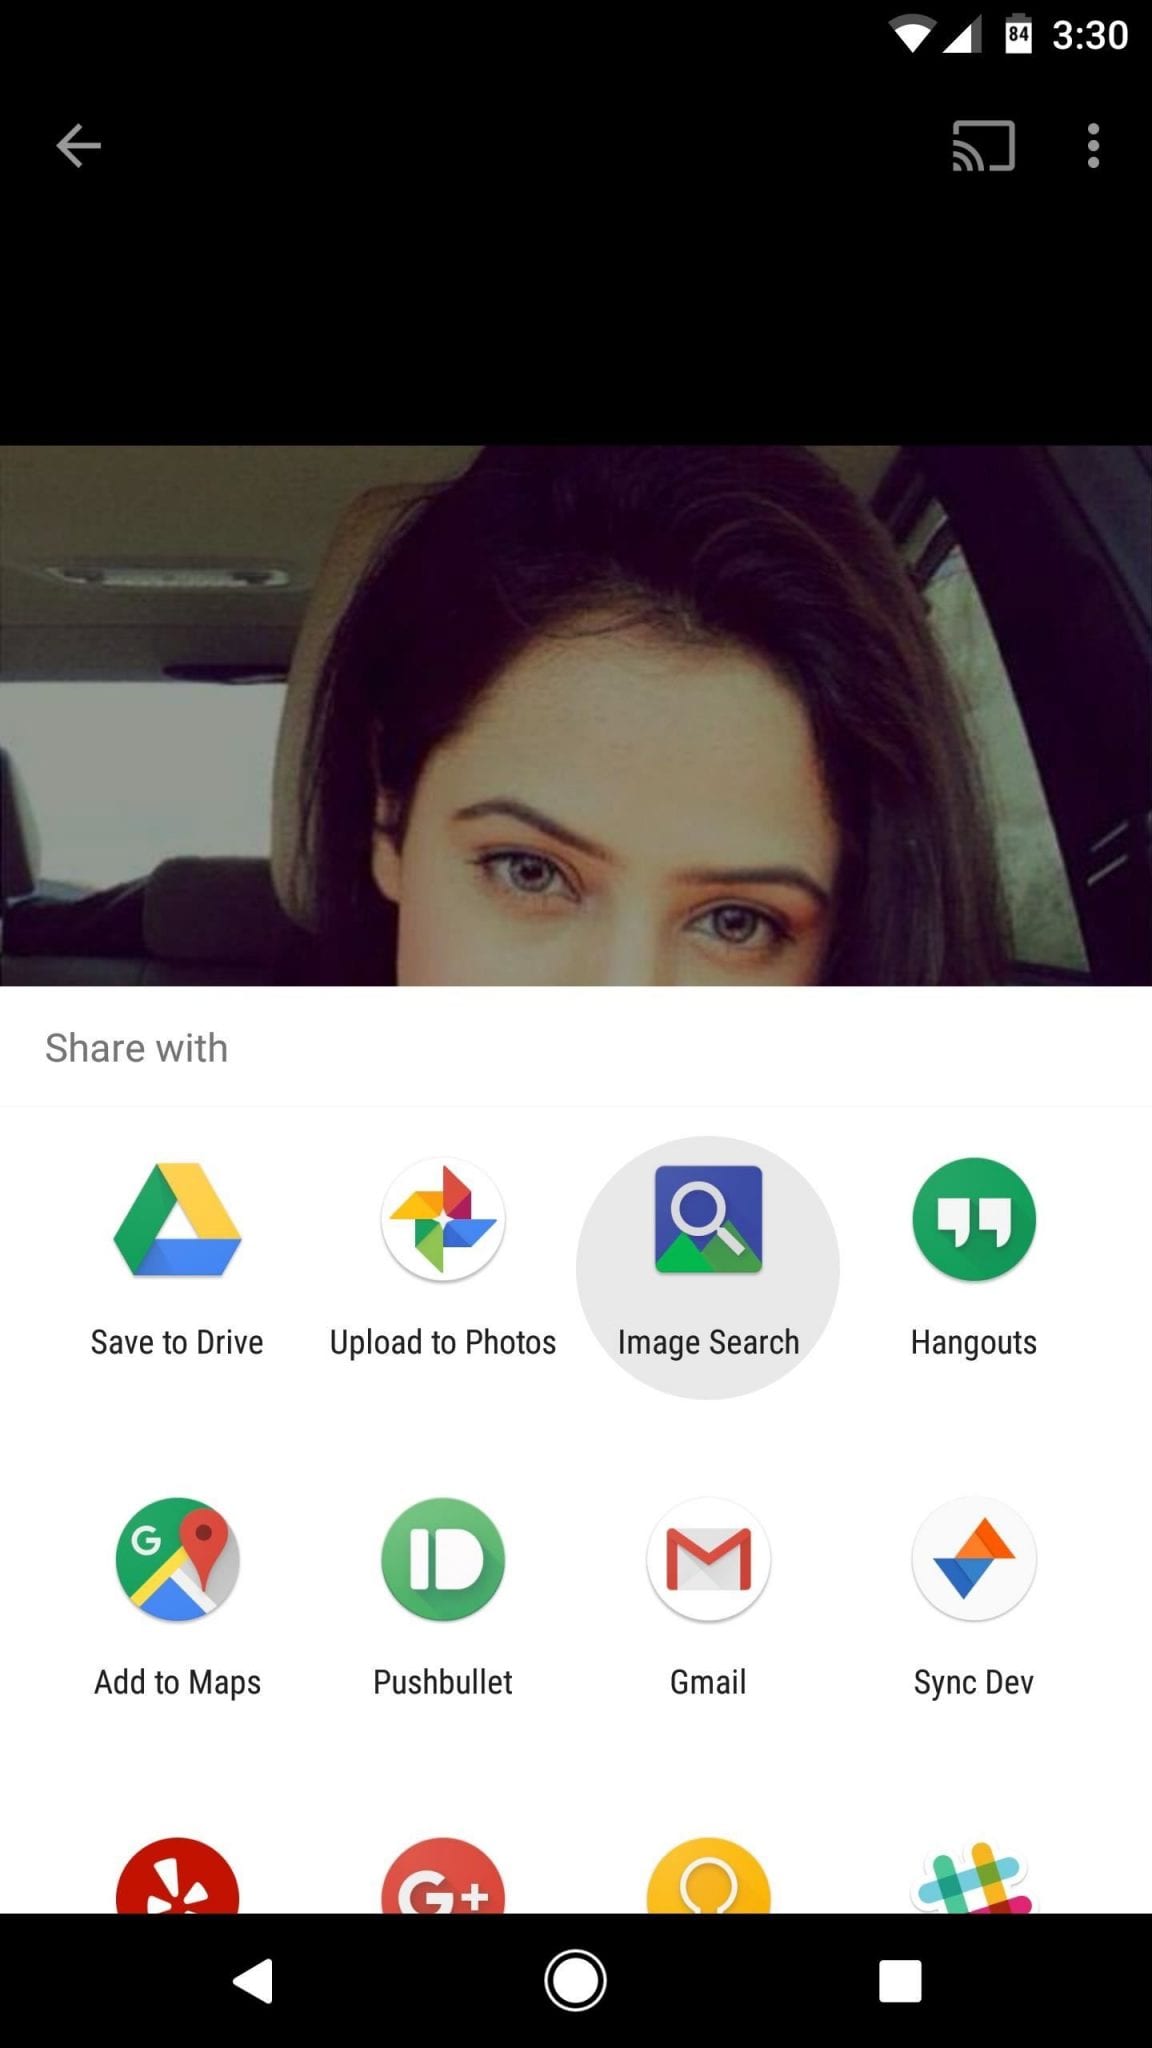 Select Image Search from the app list